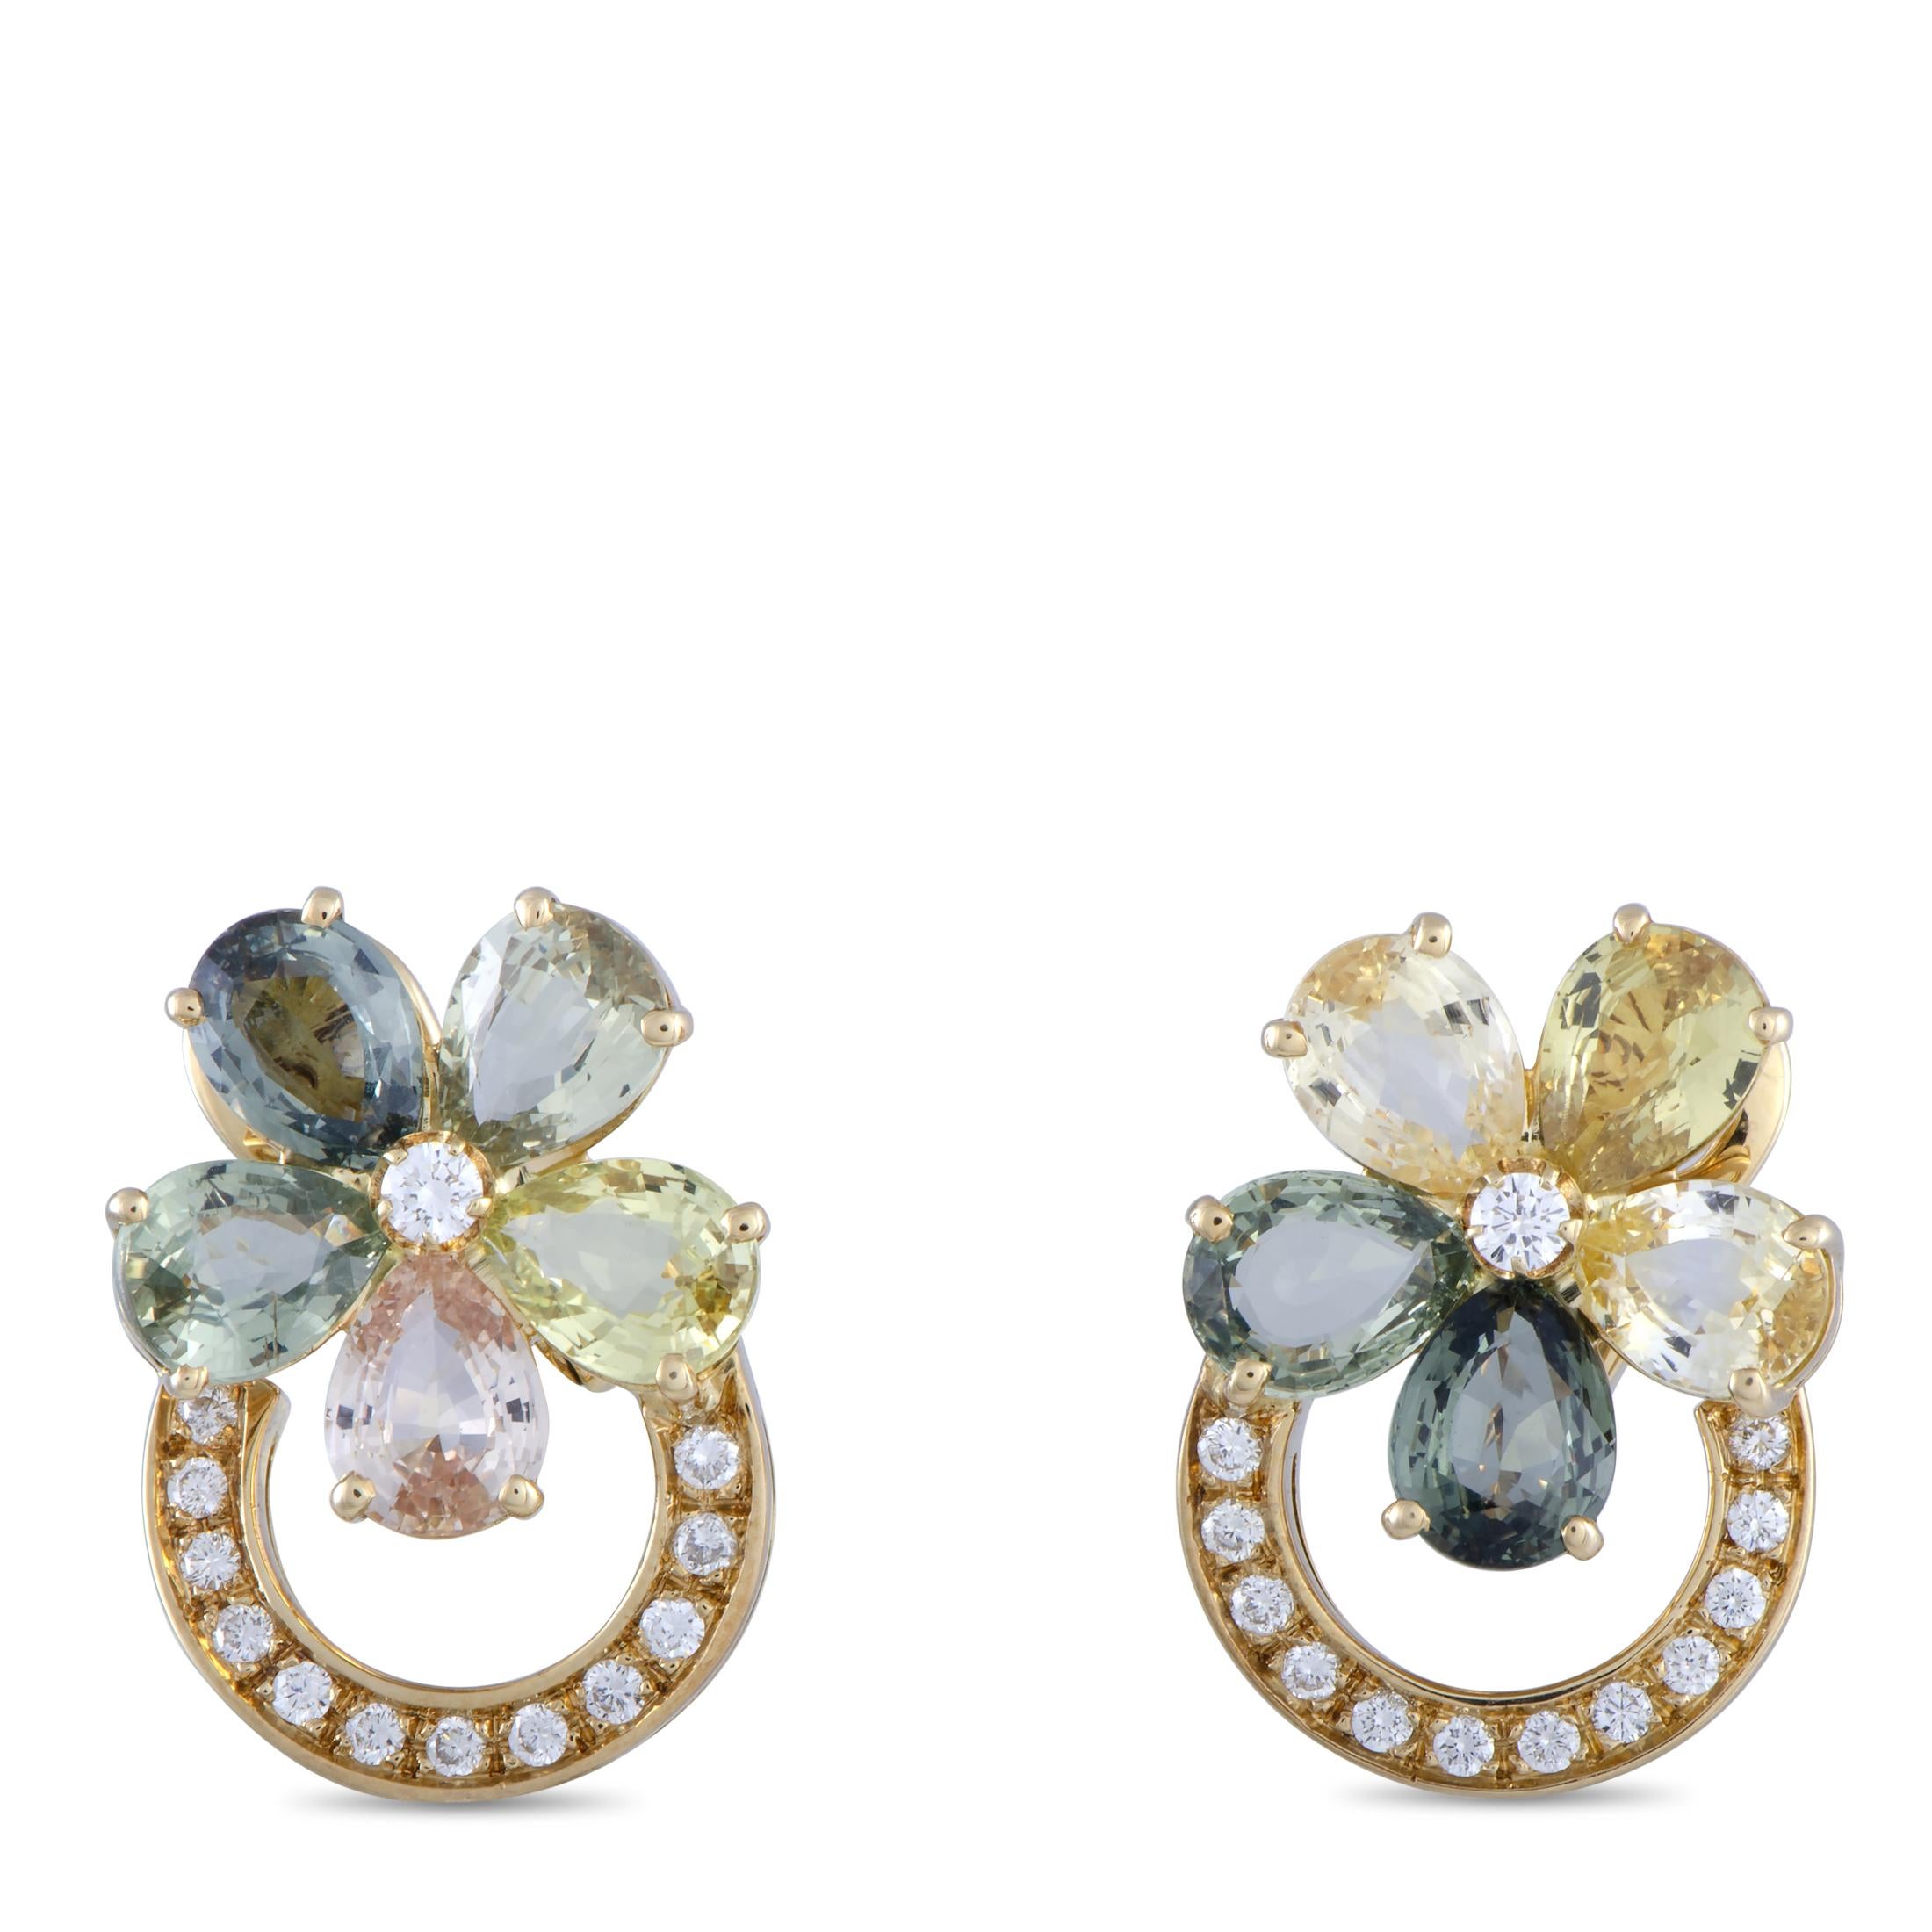 Boasting an incredibly refined design that is splendidly topped off with sublime sapphires and scintillating diamonds, these wonderful Bvlgari earrings offer a look of utmost sophistication. The pair is expertly crafted from 18K yellow gold and each